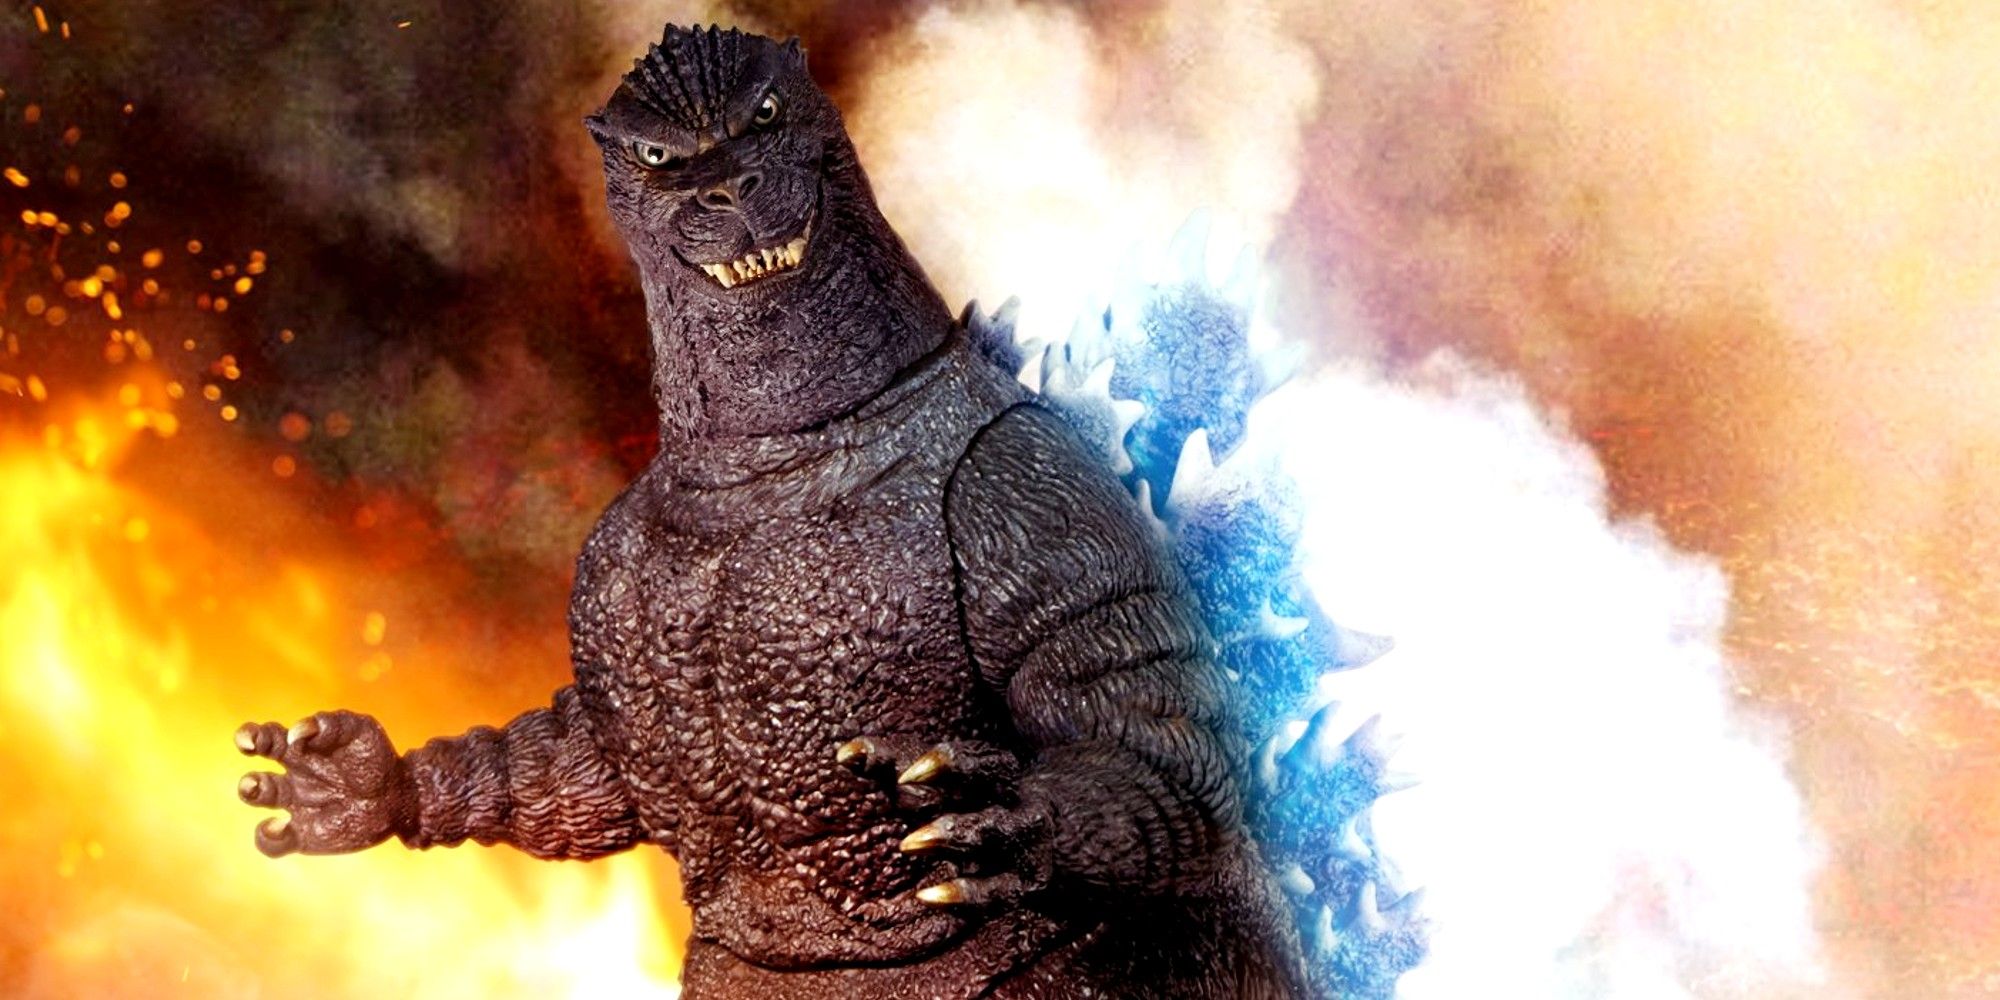 Godzilla Massive 3ft Tall Figure Available for PreOrder